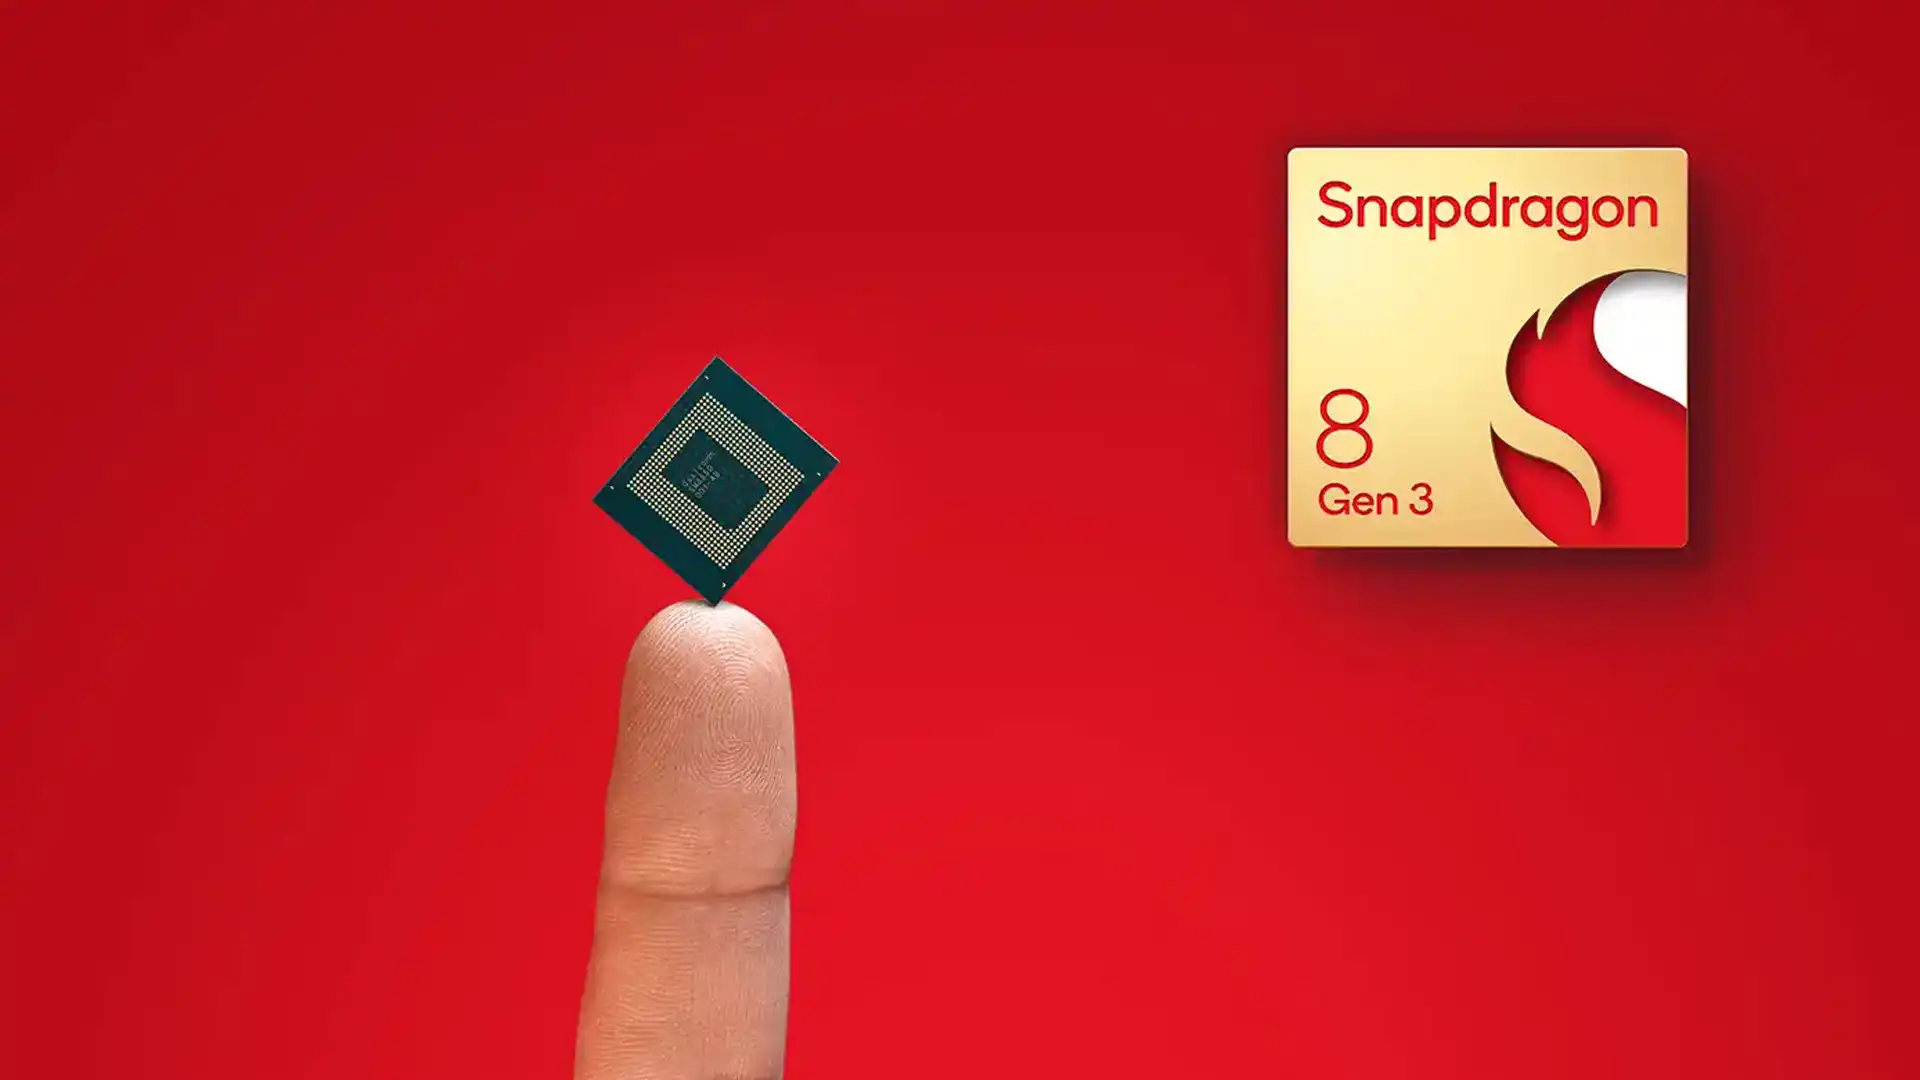 Qualcomm Unveils Snapdragon 8 Gen 3 AI Chip for Android Devices